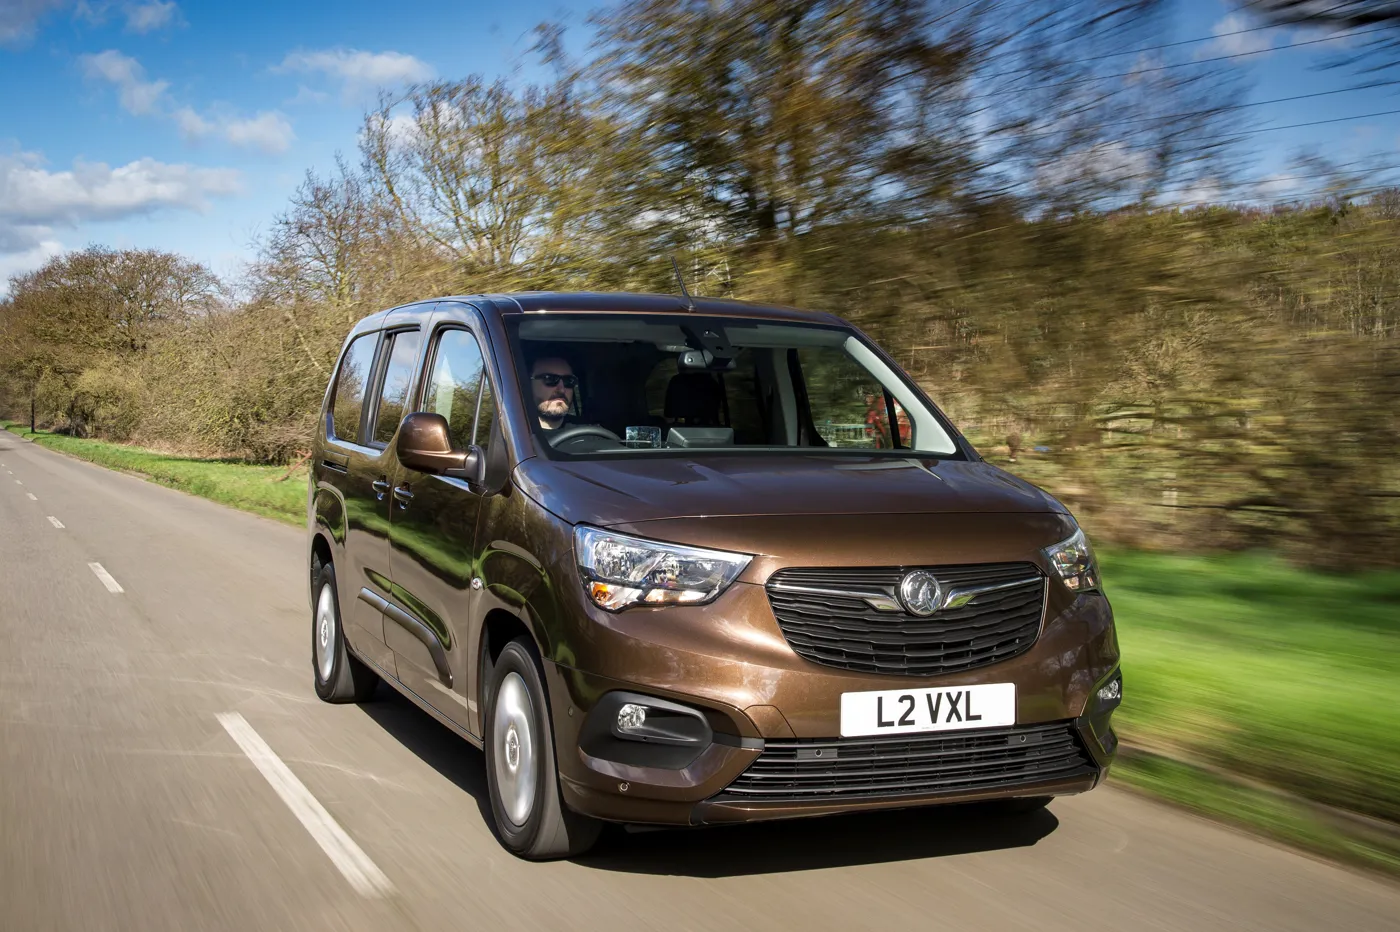 Vauxhall Combo Life XL is a low-cost MPV replacement